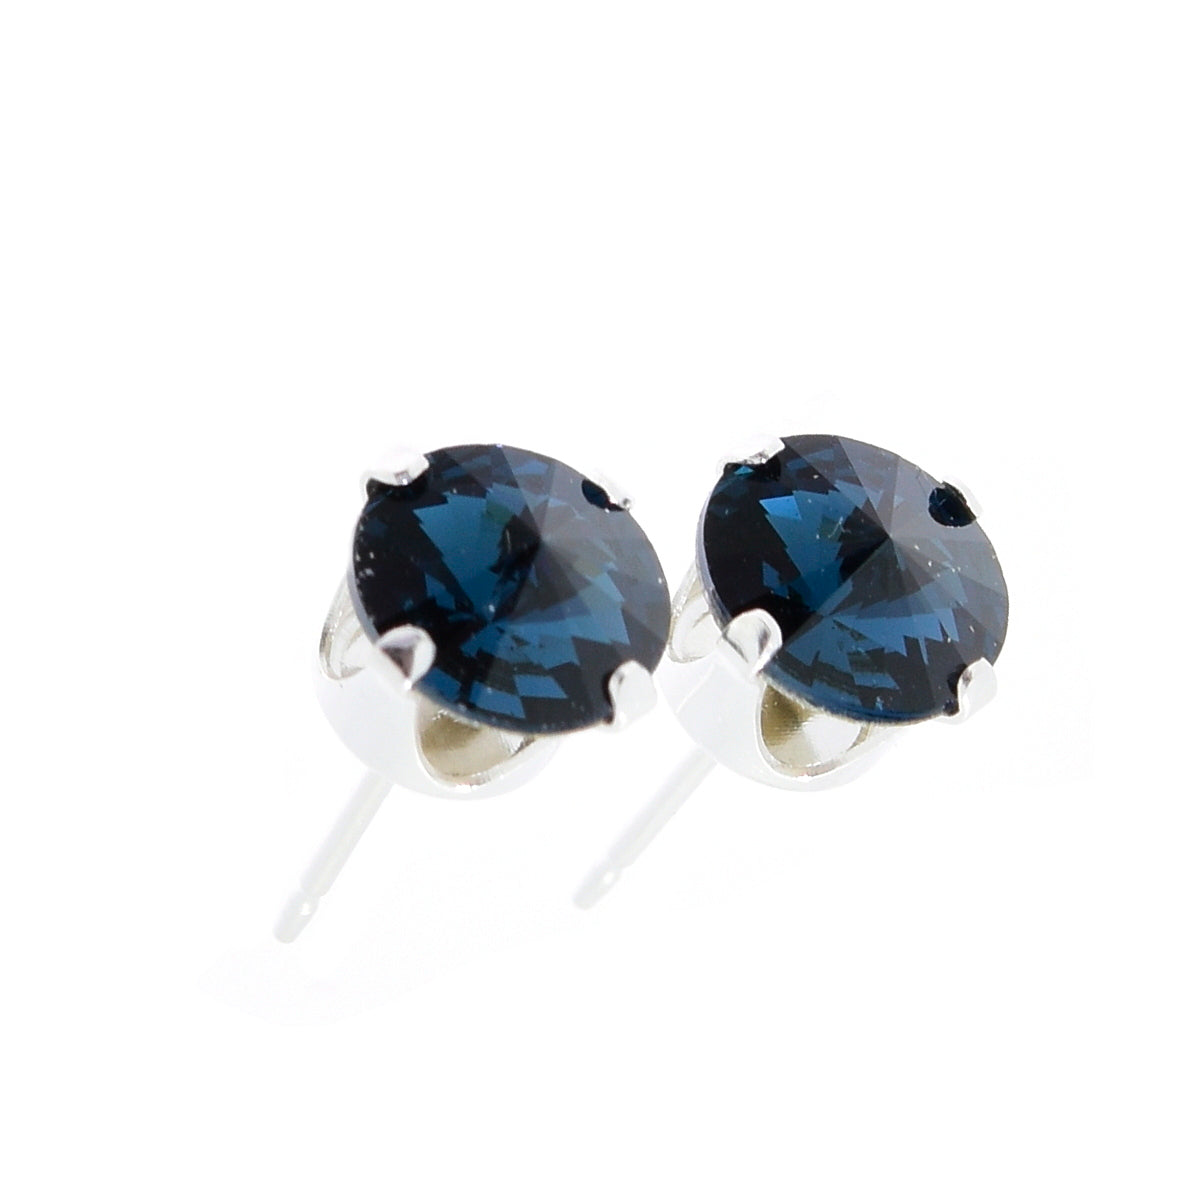 pewterhooter® Women's Classic Collection 925 Sterling silver earrings with brilliant Montana Blue crystals, packaged in a gift box for any occasion.